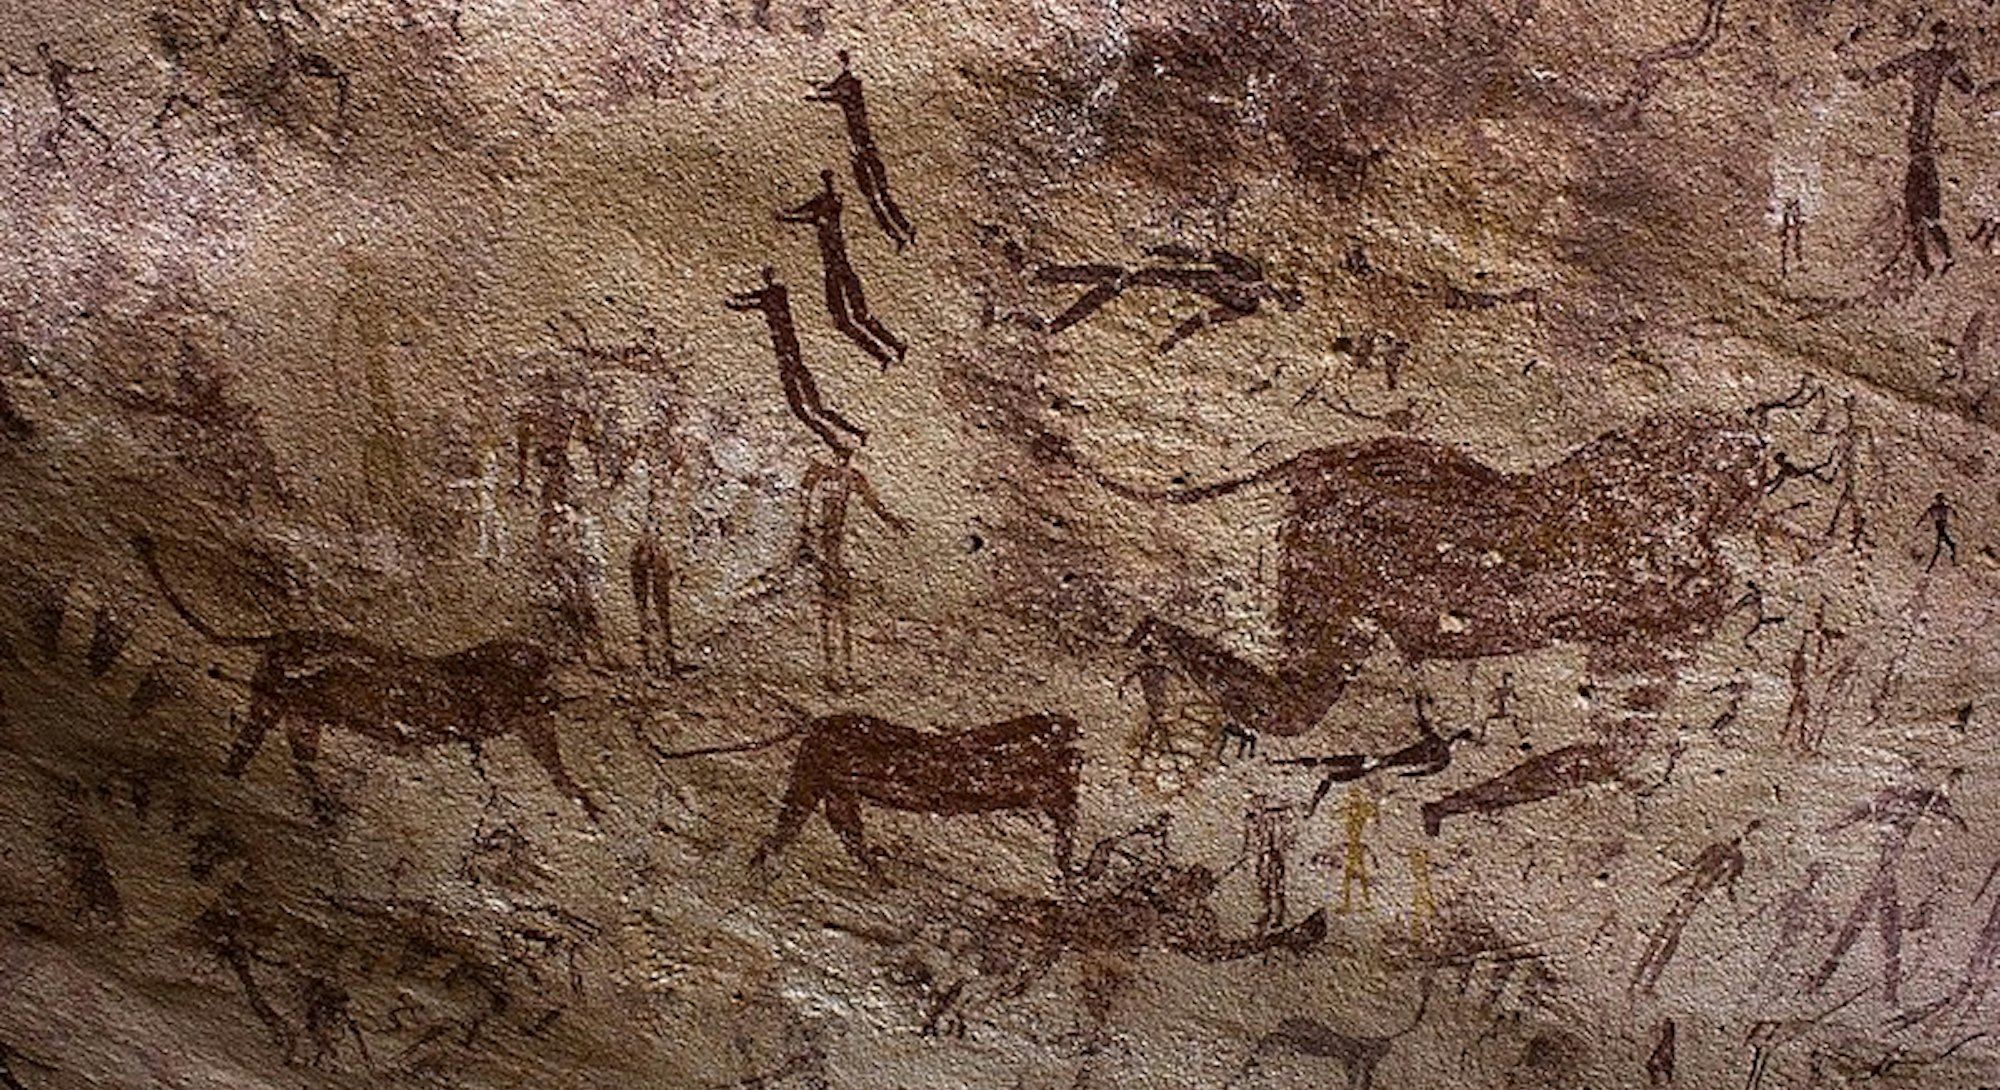 Paintings of human figures and animals on a brown cave wall